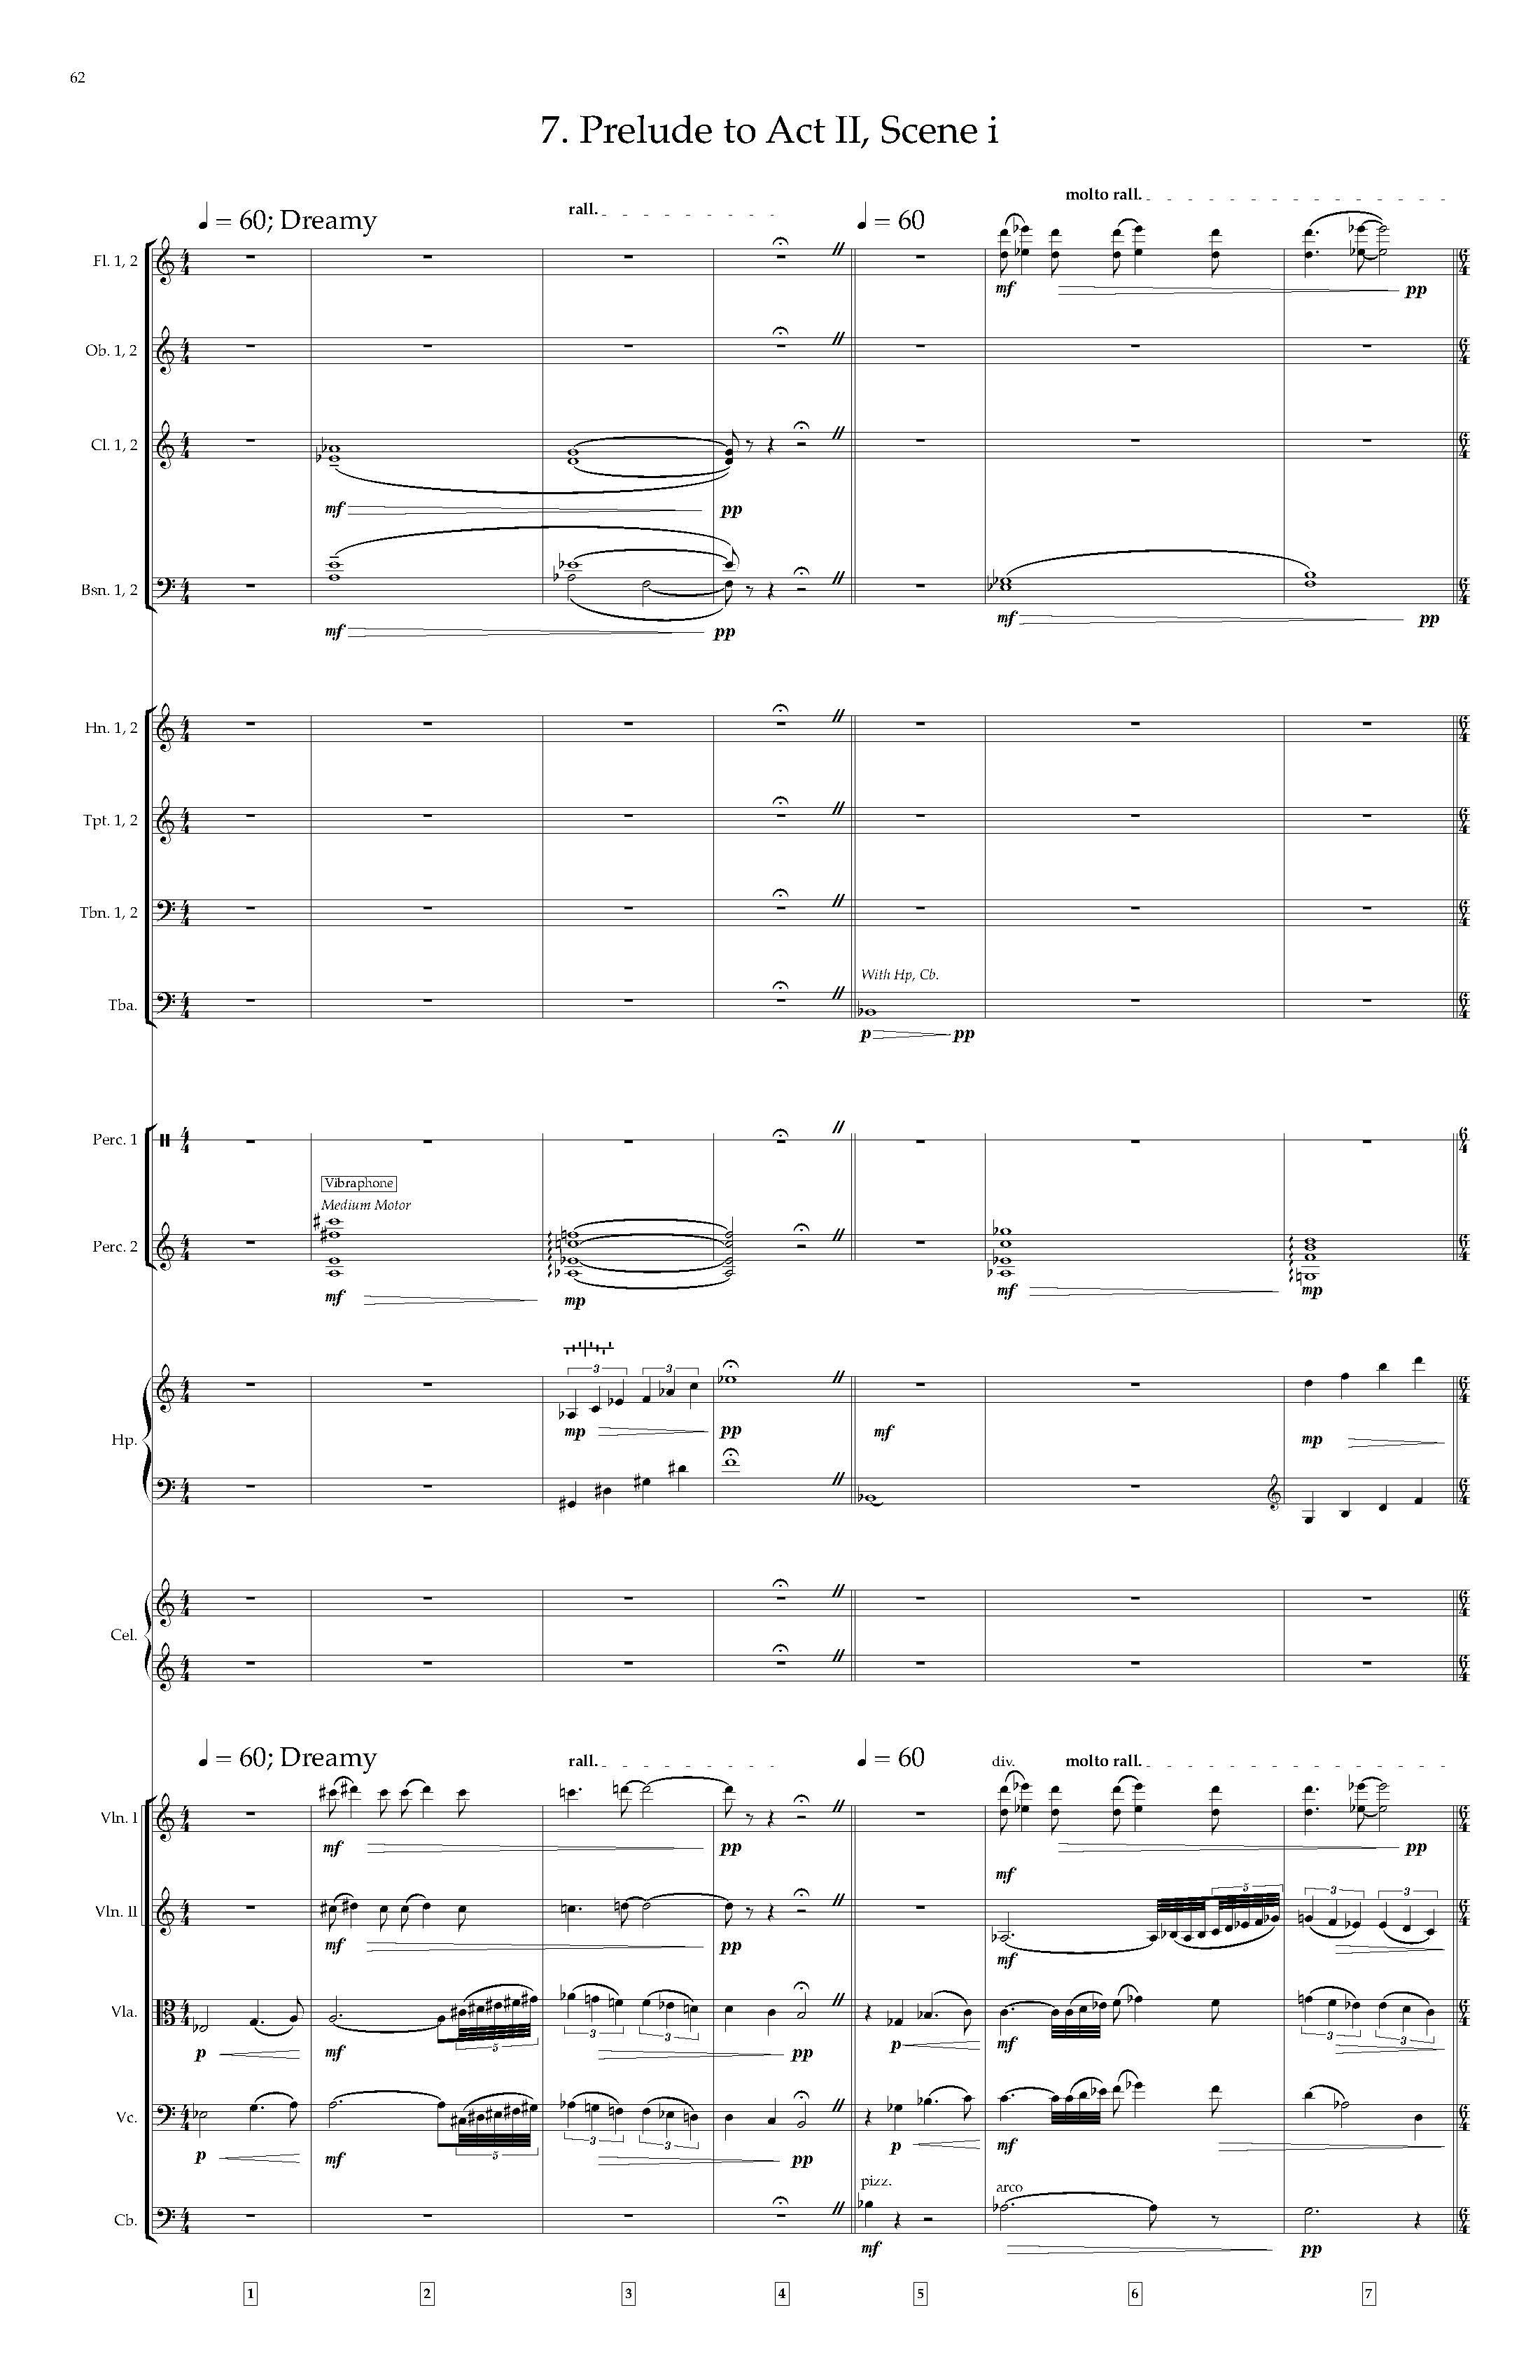 Arias and Interludes from HWGS - Complete Score_Page_68.jpg